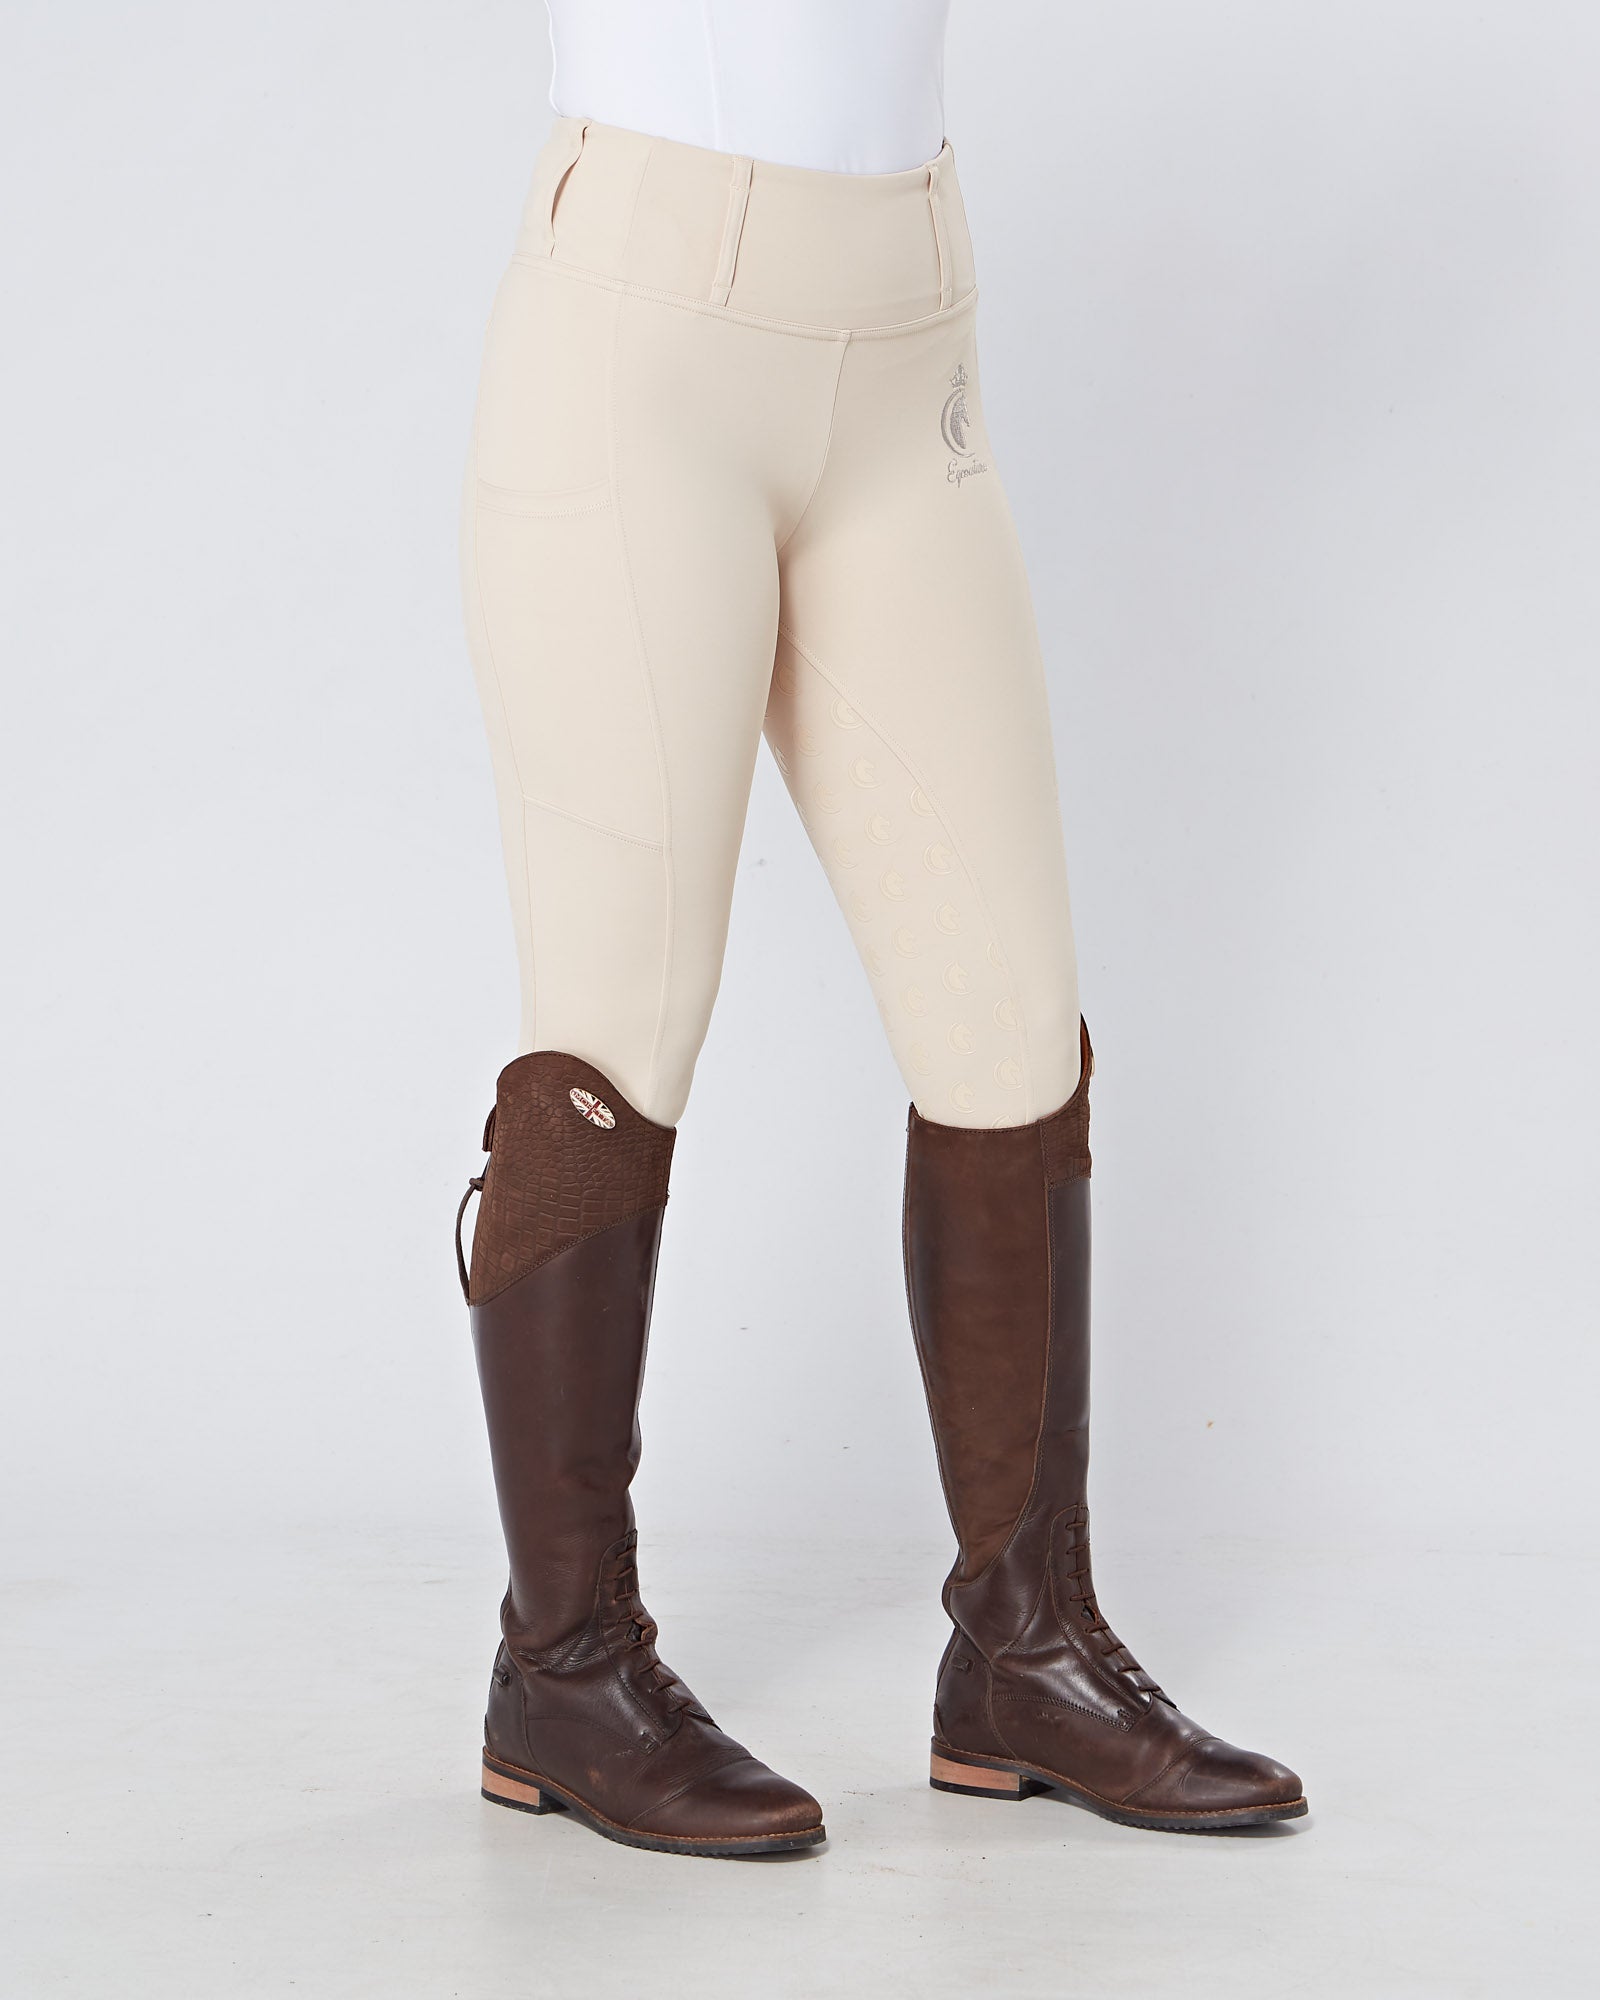 Cream Horse Riding Competition Tights / Leggings with pockets  - CORNISH CREAM